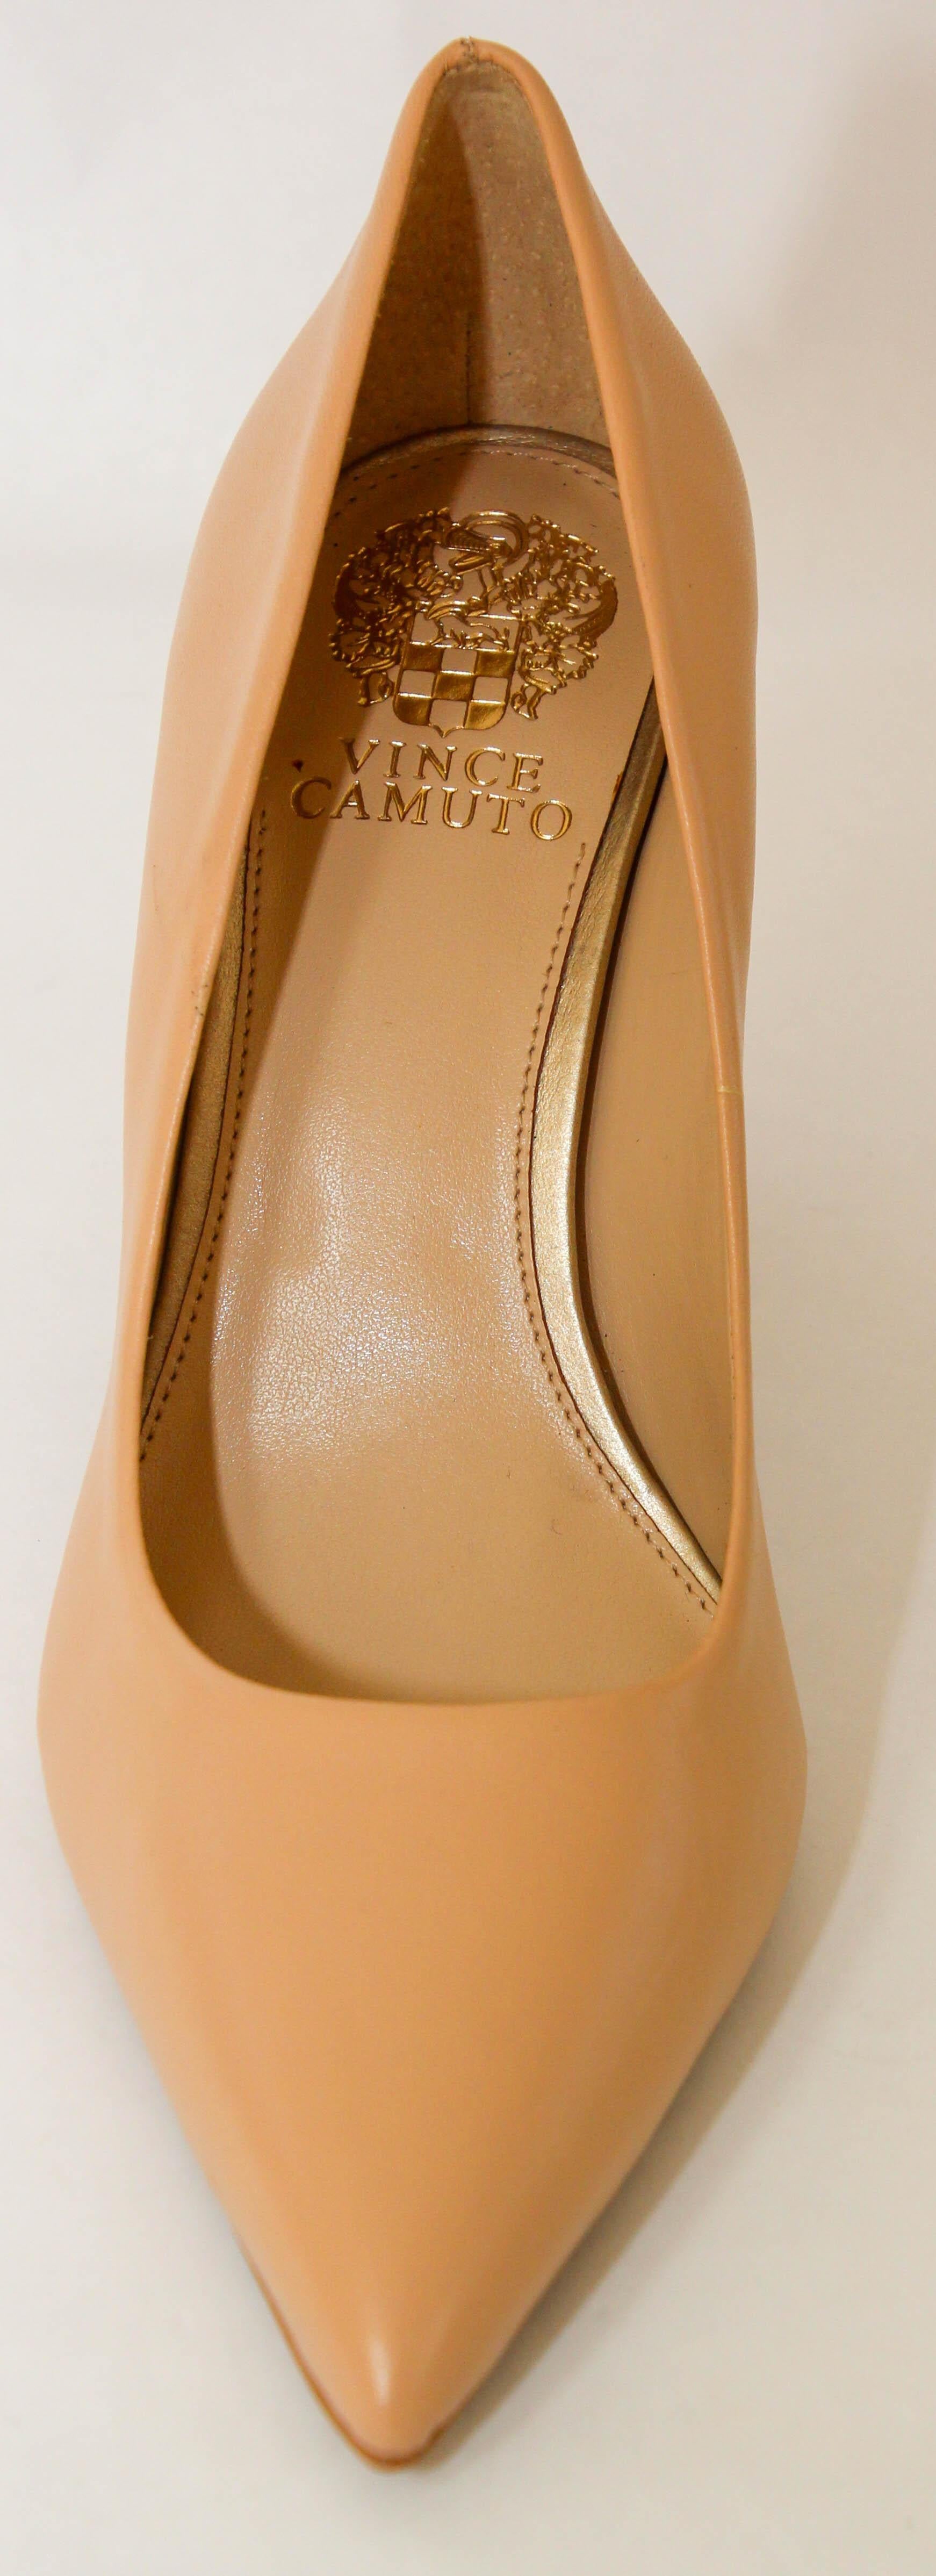 Vince Camuto Tan Leather Heel Pointed Toe Pump size 8.5  For Sale 3